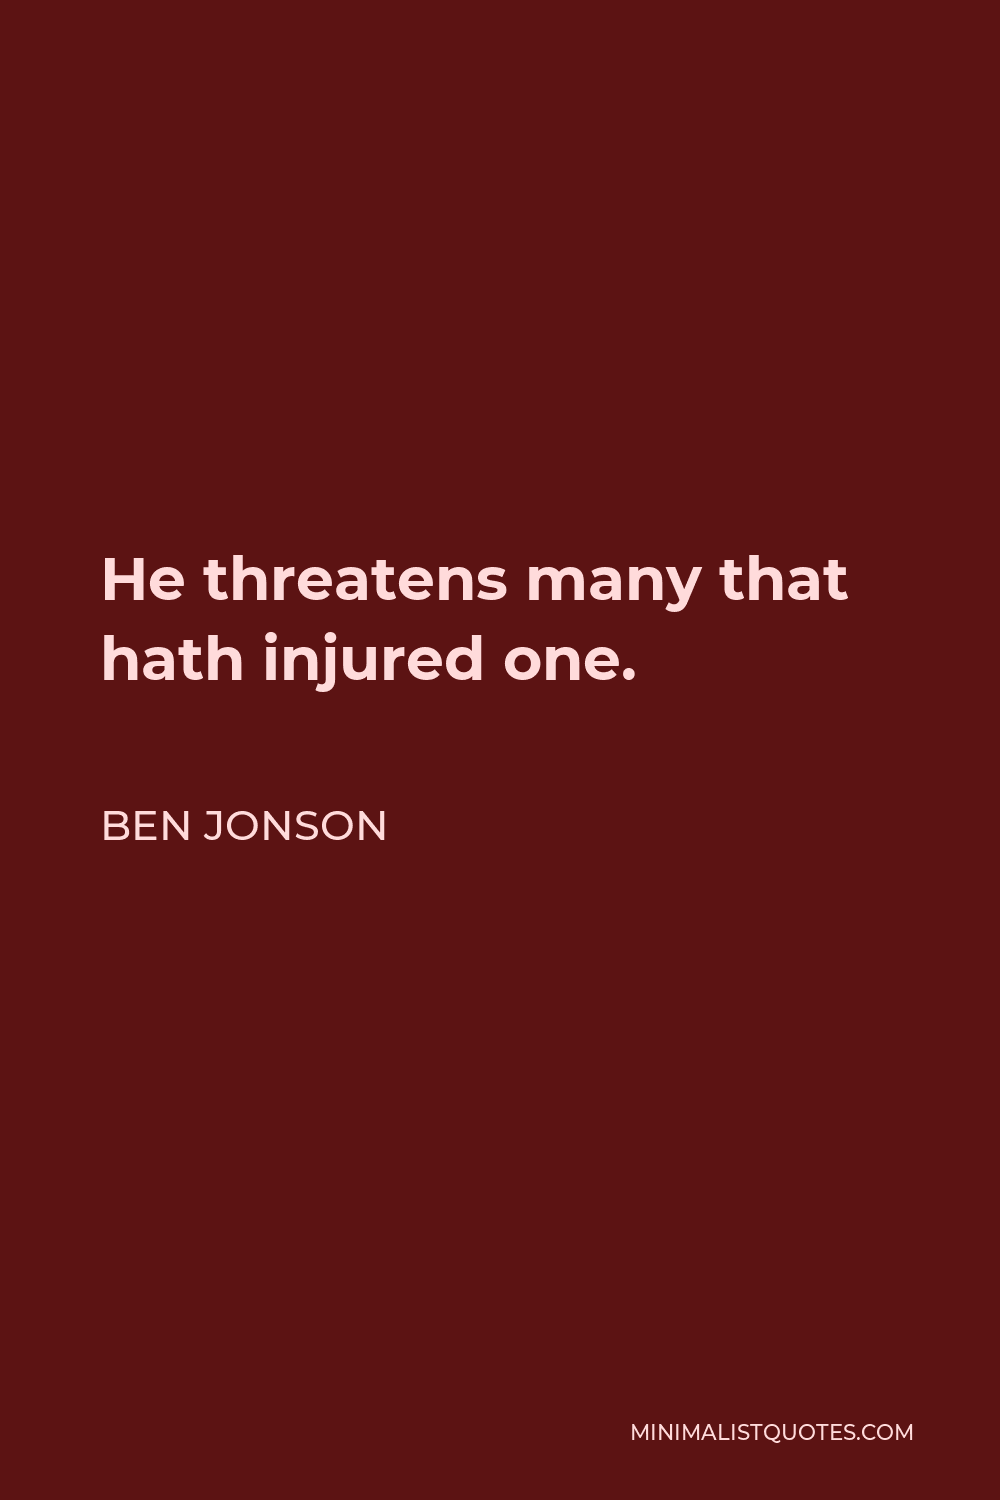 Ben Jonson Quote - He threatens many that hath injured one.